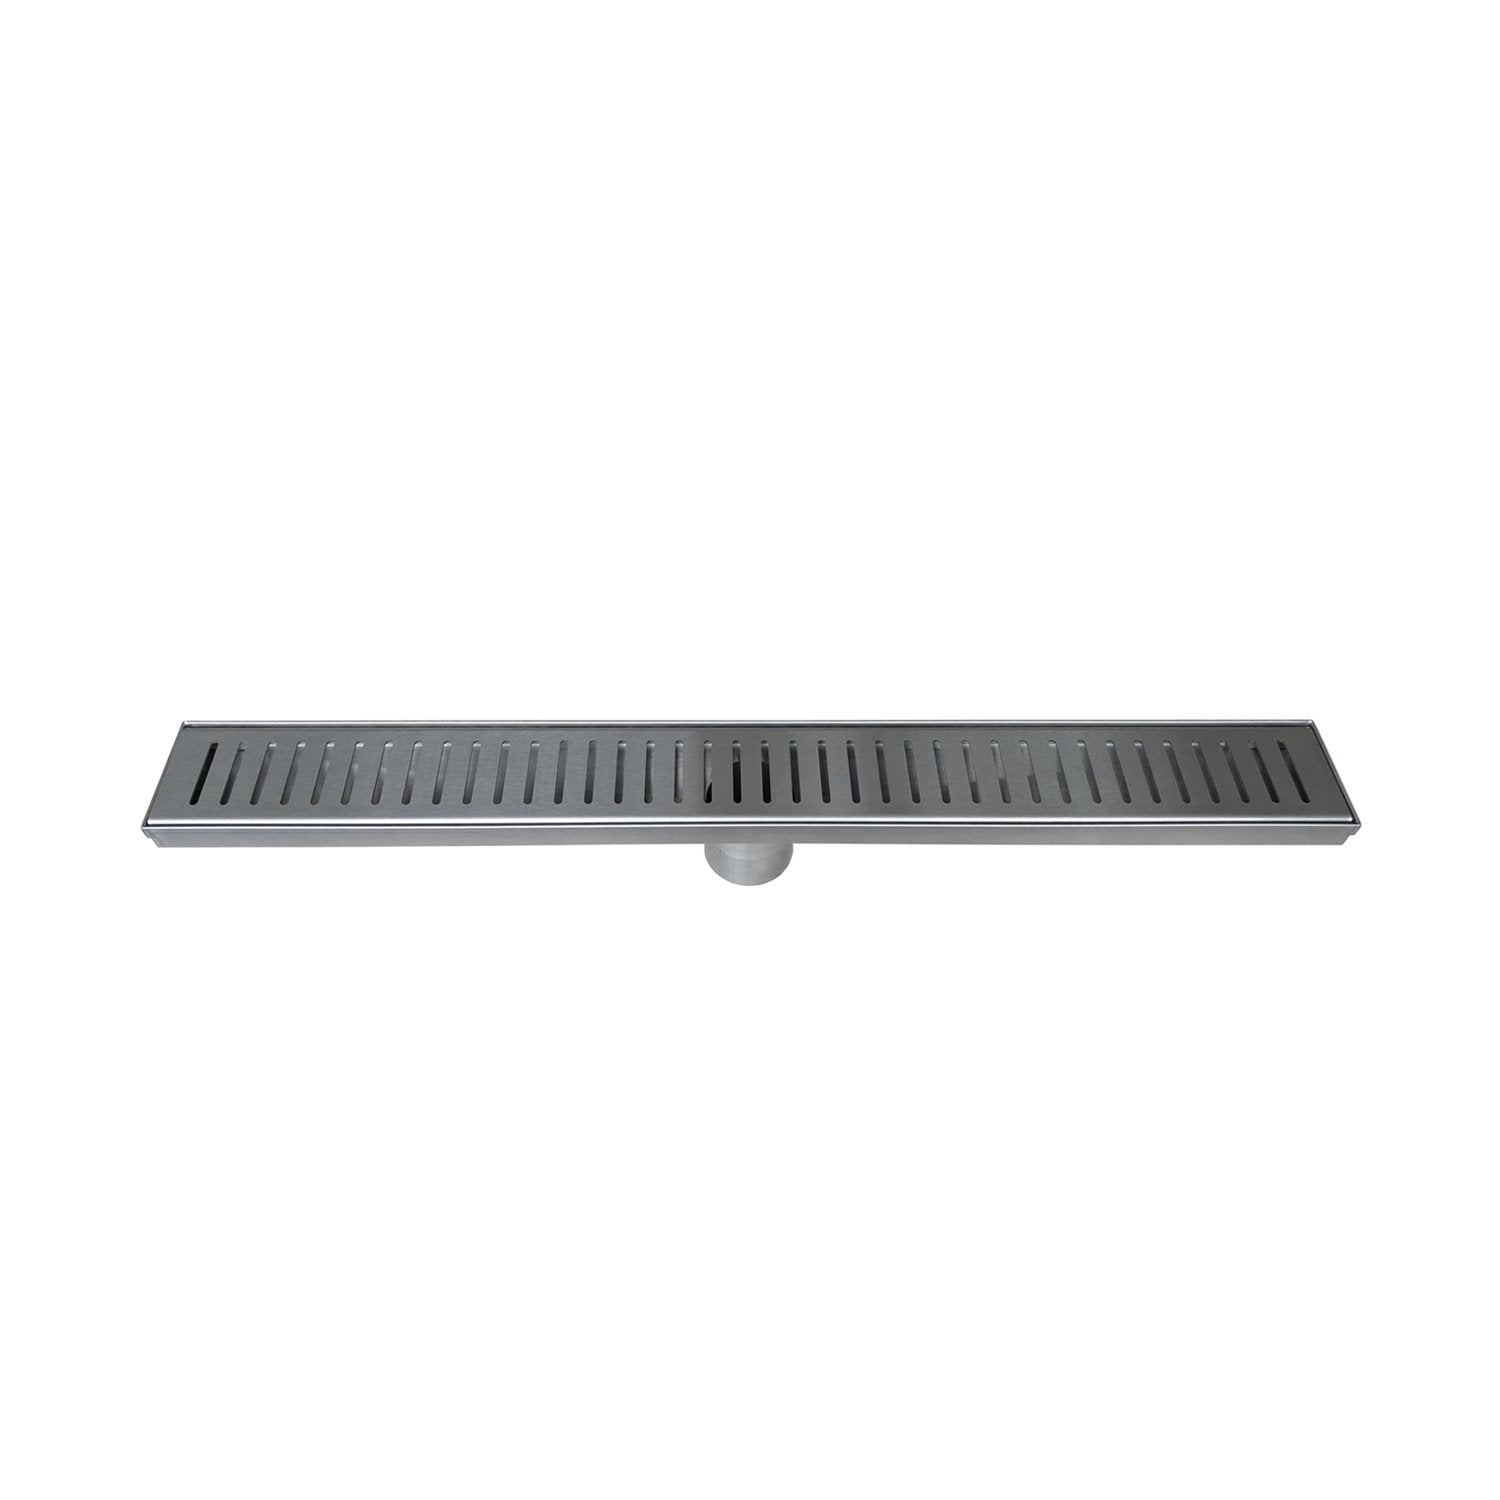 DAX Rectangle Shower Floor Drain, Stainless Steel Body, Stainless Steel Finish, 24 x 3-3/8 Inches (DR24-G06)